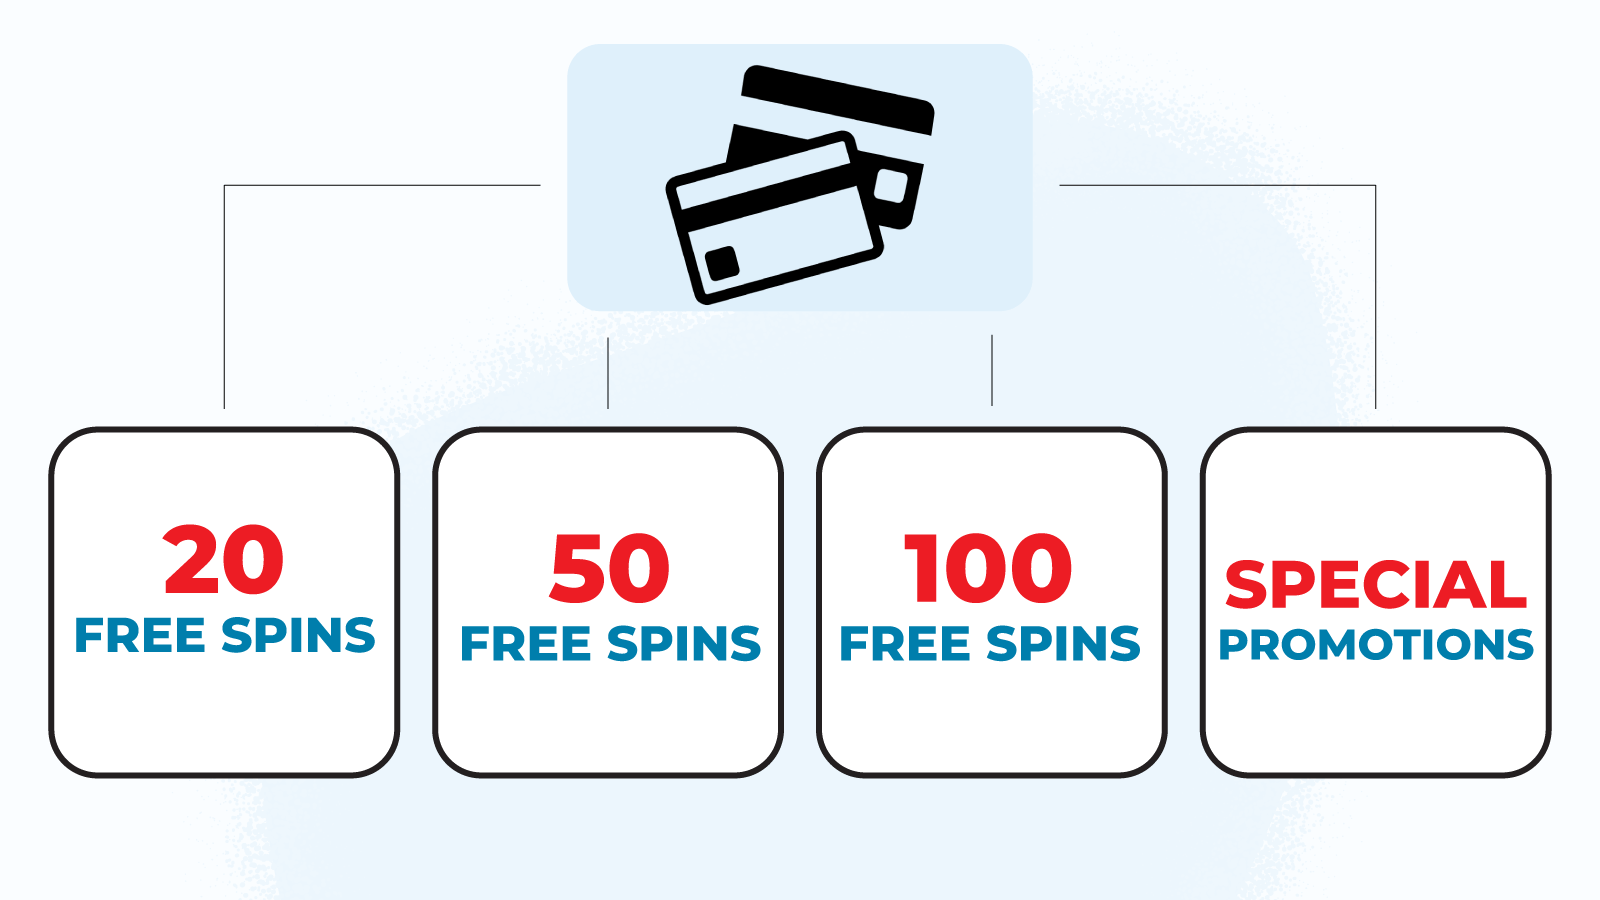 Different variants of free spins for adding card bonuses